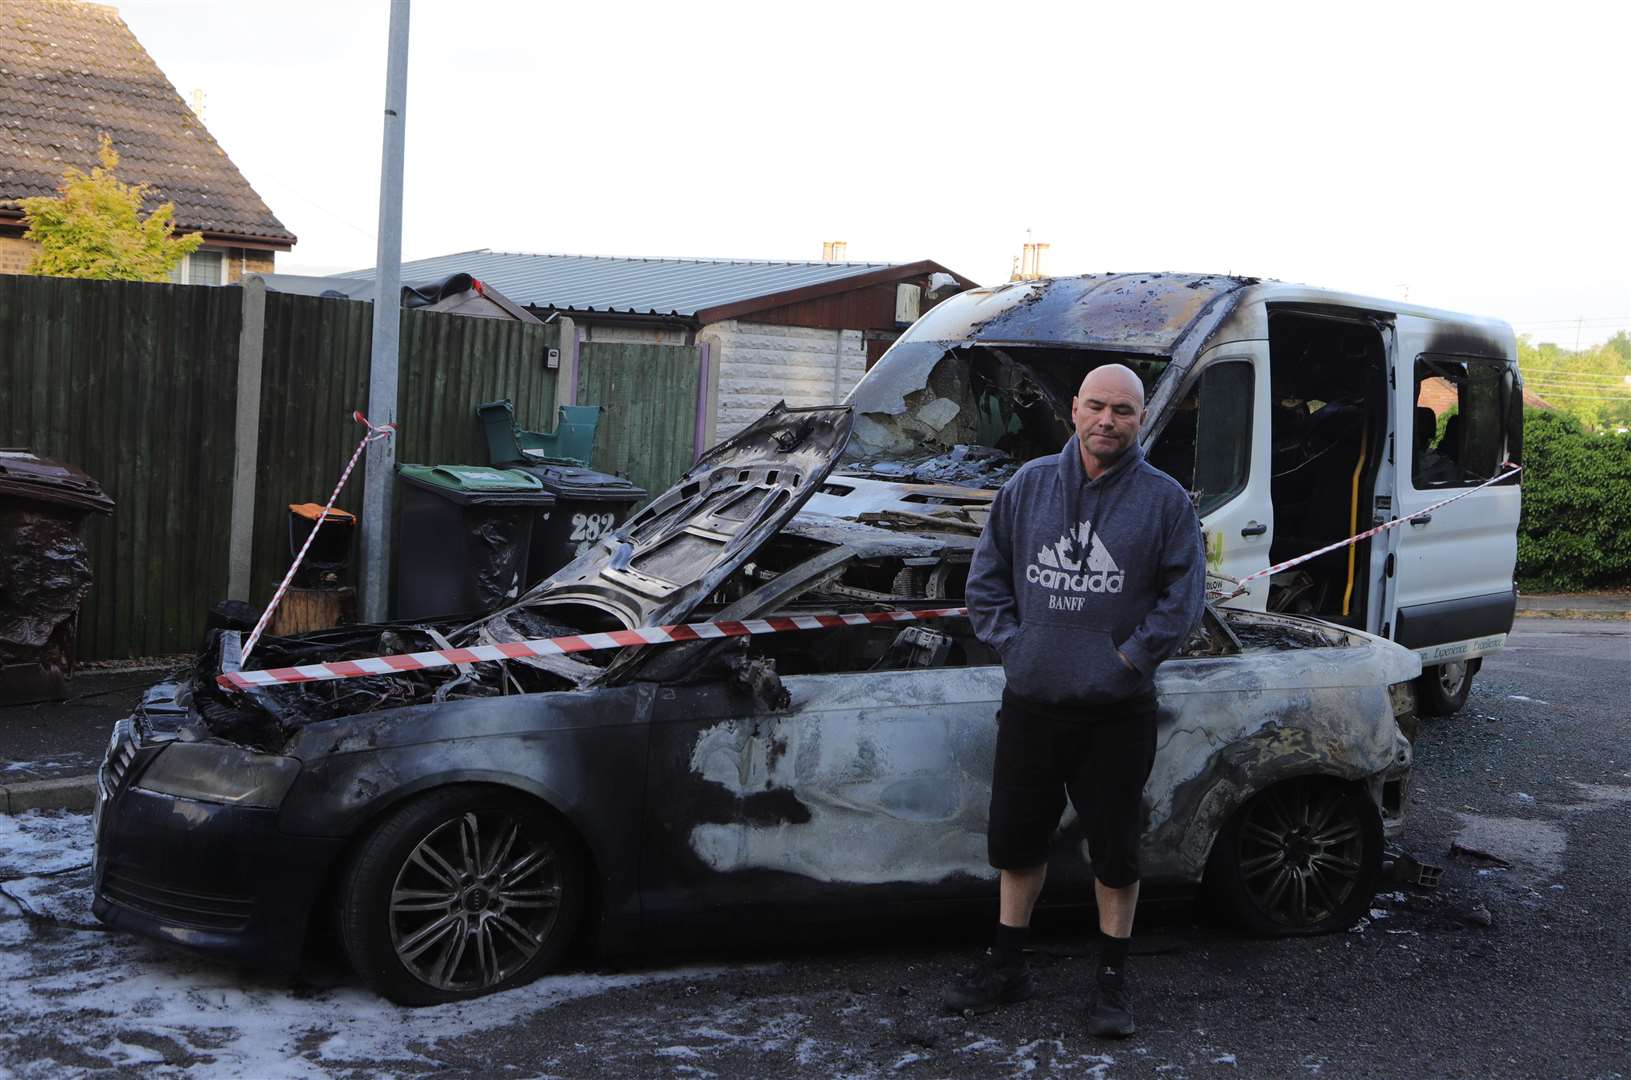 Robert Hallifax raced to save his van from being set alight by the burning vehicle. Picture by Keith Thompson